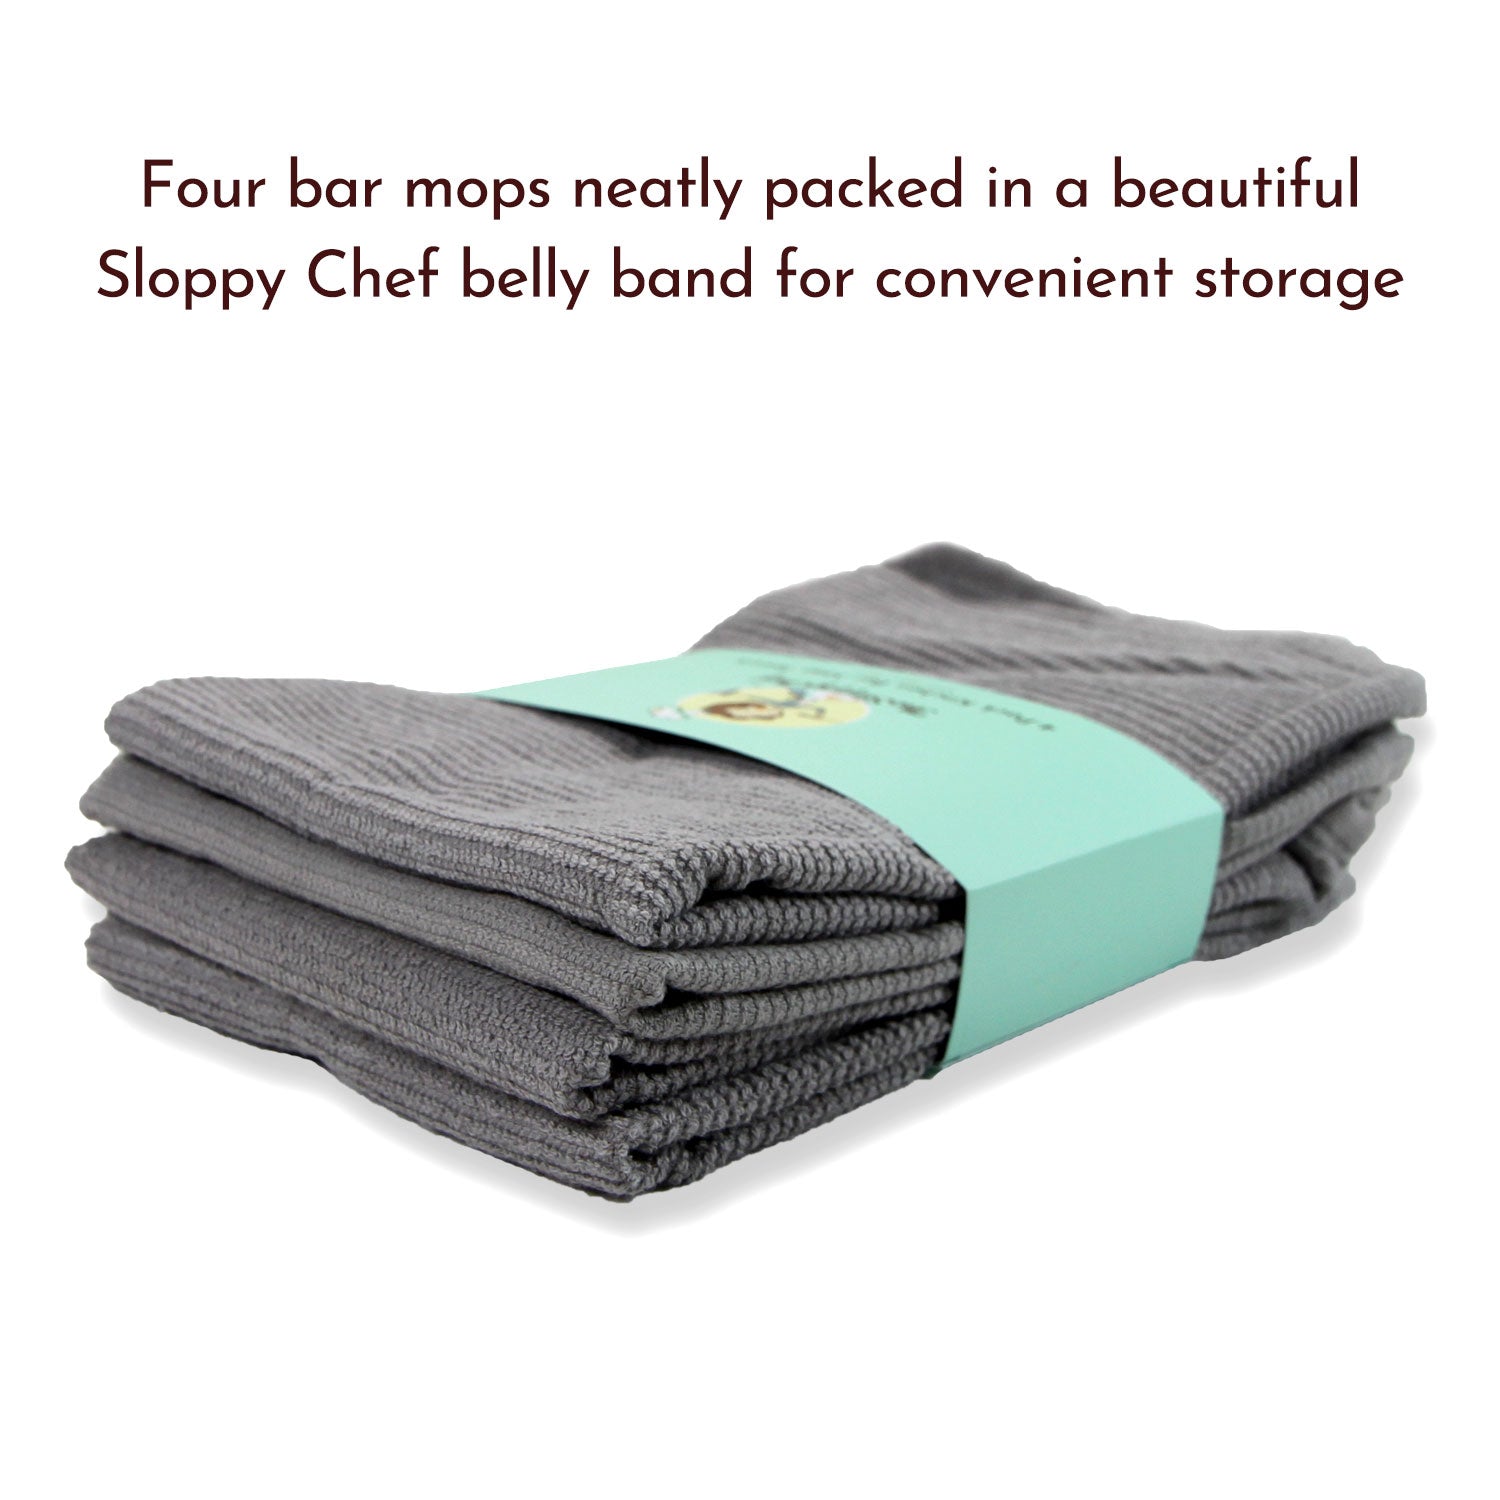 Sloppy Chef Bulk Case of 192 Bar Mop Kitchen Towels, 16x19 in., Assorted Colors and Patterns, Single Style per Pack, 48 Packs of